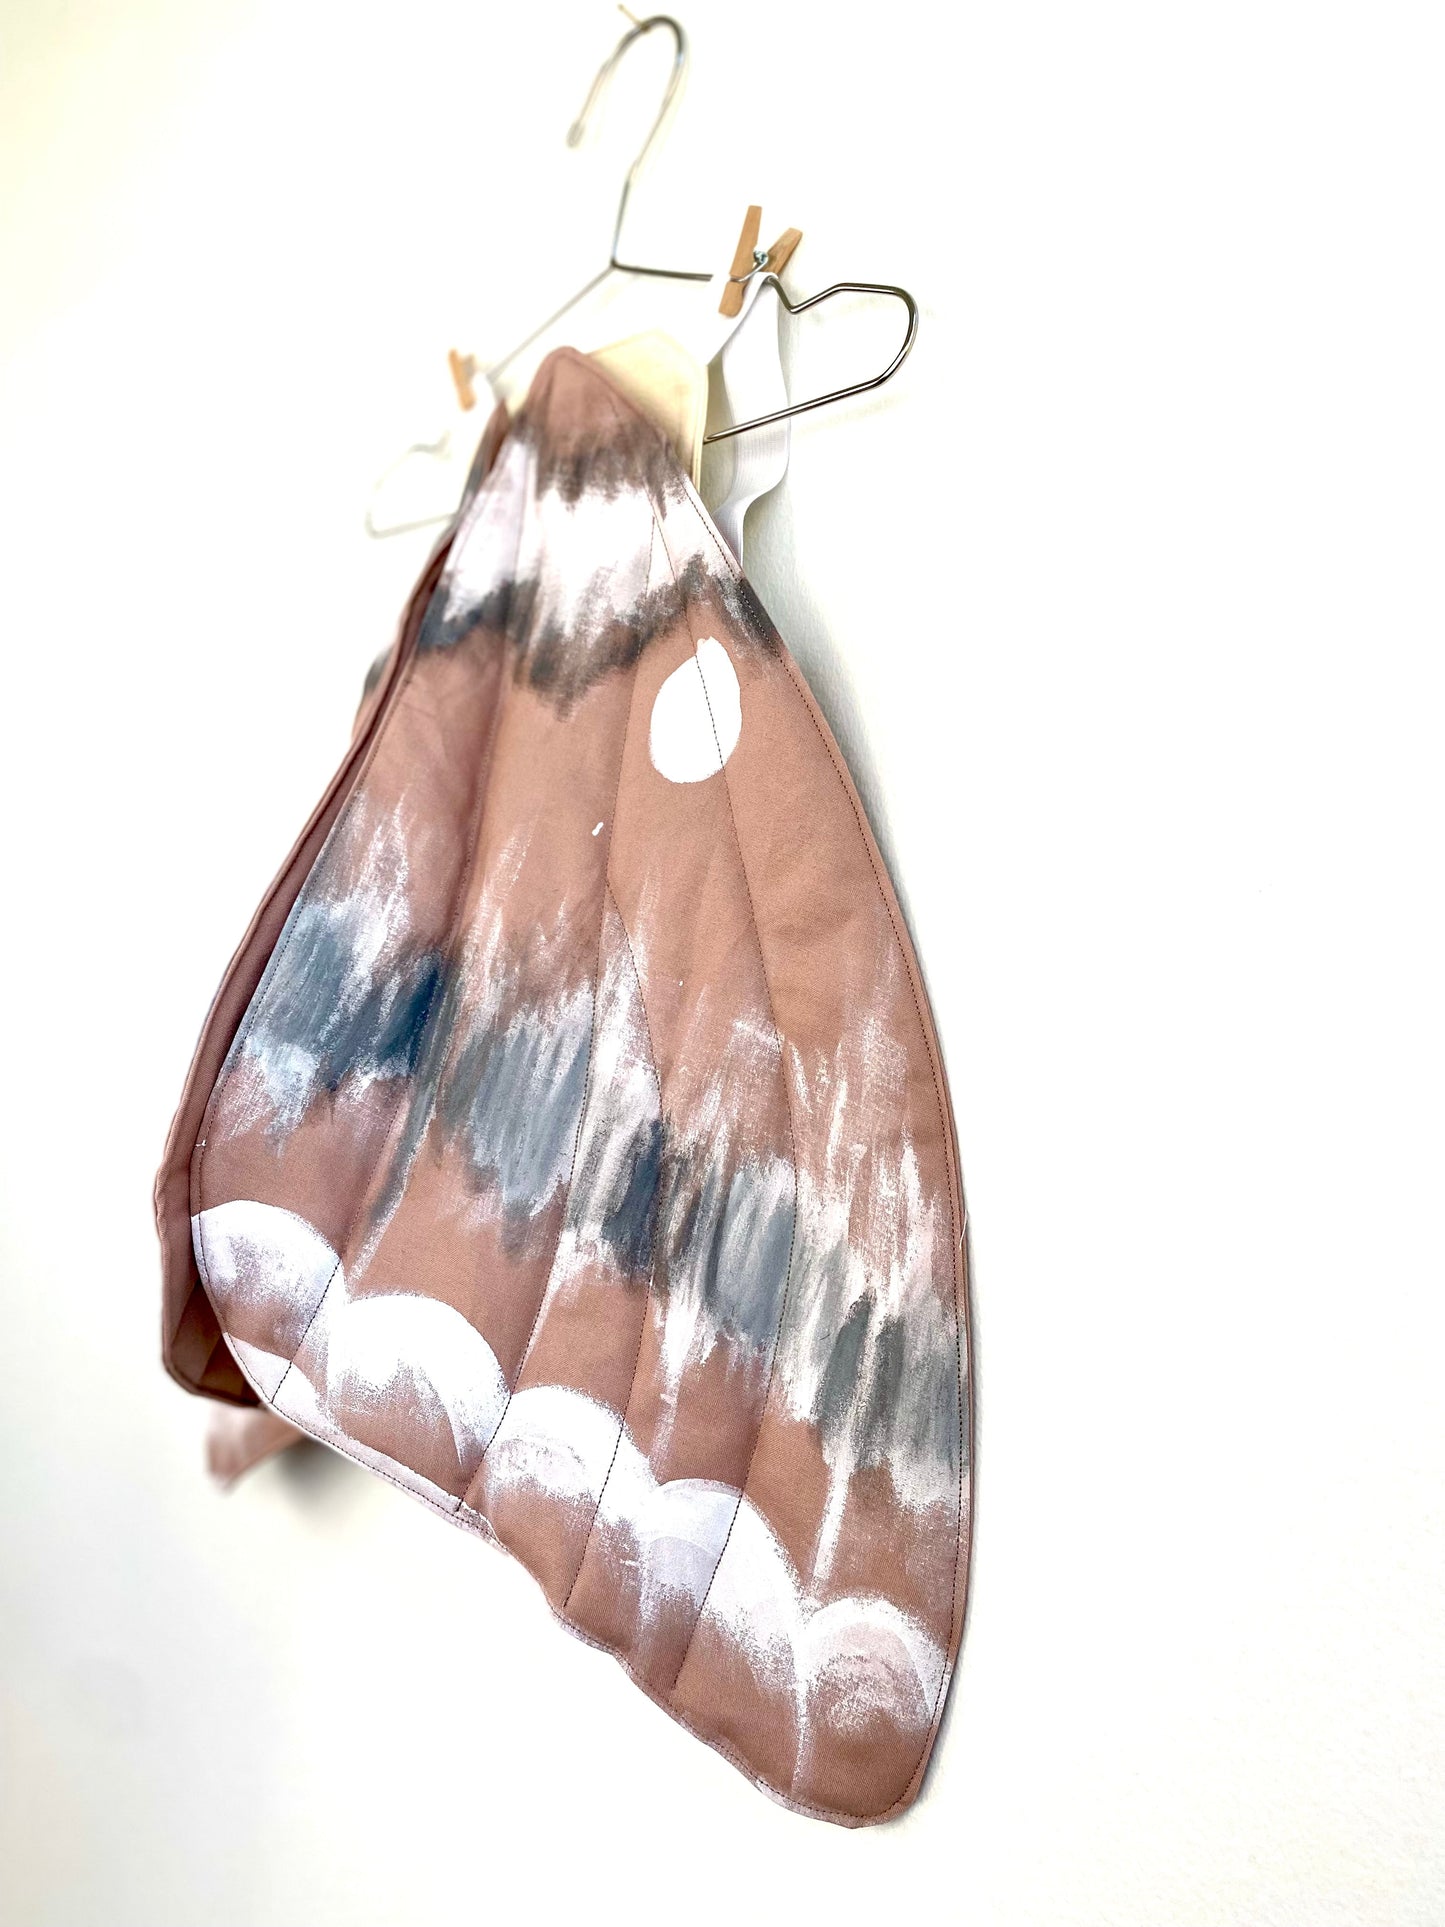 Moth wings costume for children's nature play.